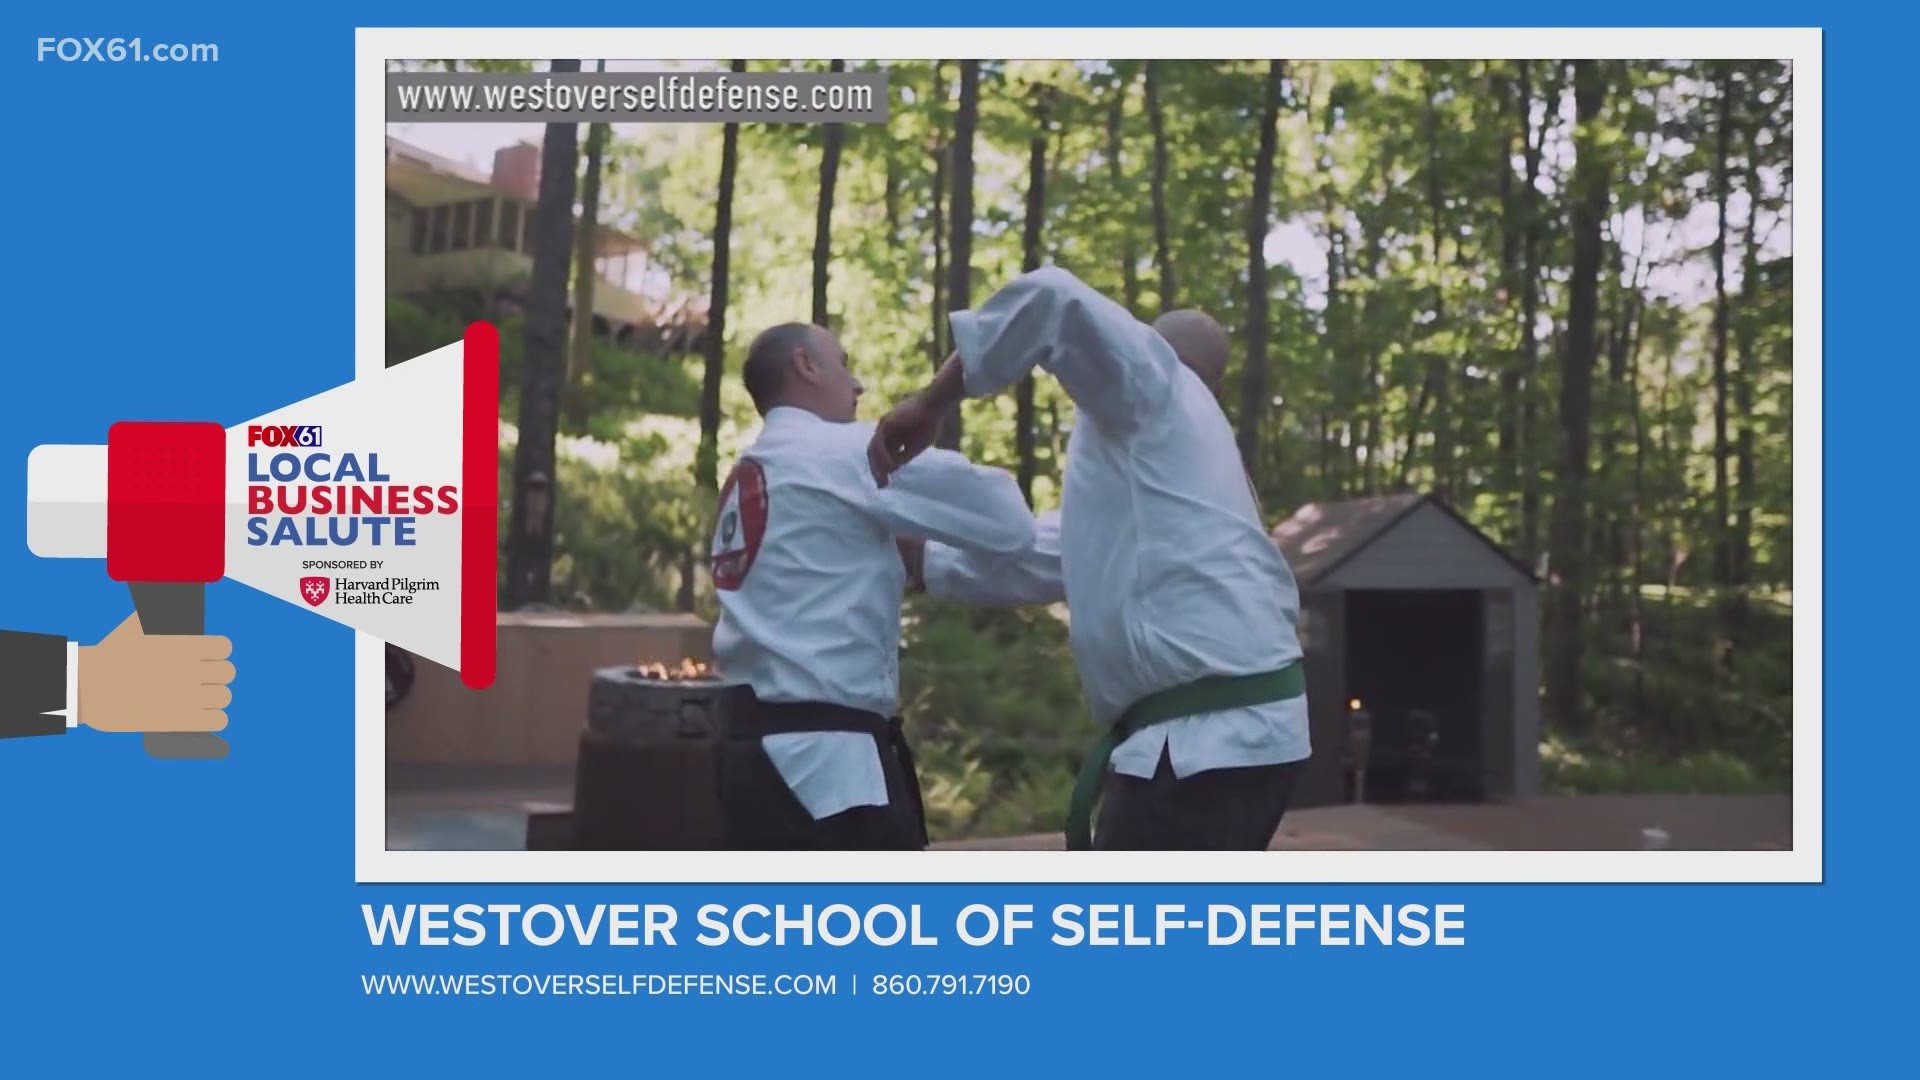 The school teaches jujitsu, a style of self-defense. Westover says those who go there are looking for personal development and growth